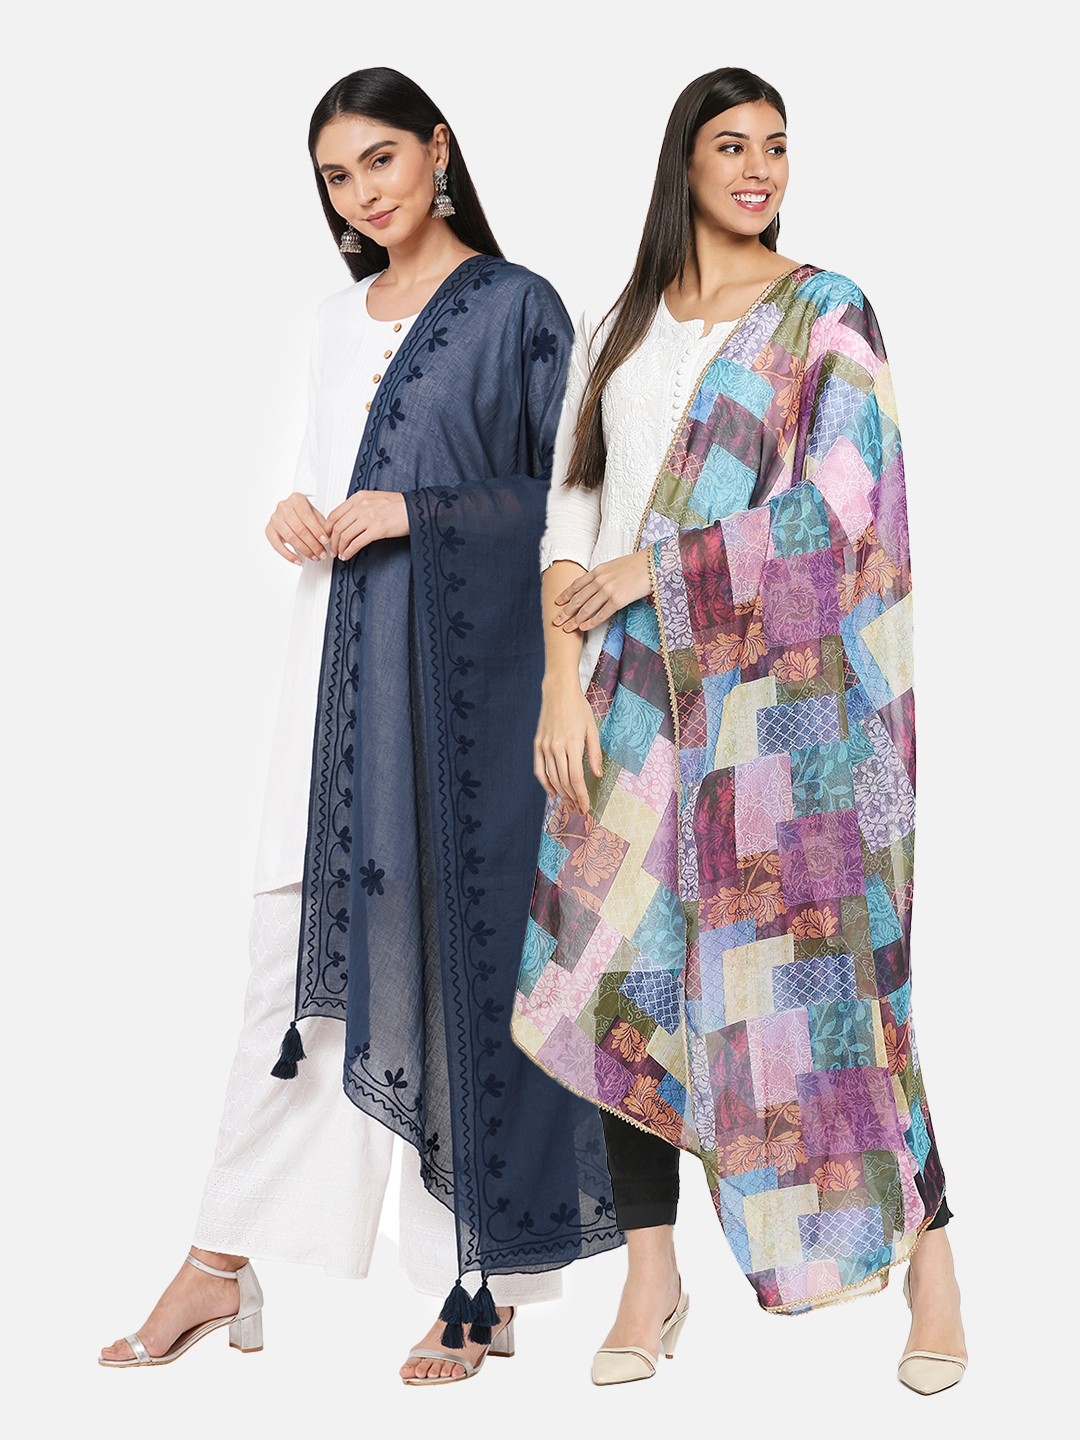 Get Wrapped | Get Wrapped Embroidered & Digital Printed Dupatta Combo for Women - Pack of 2